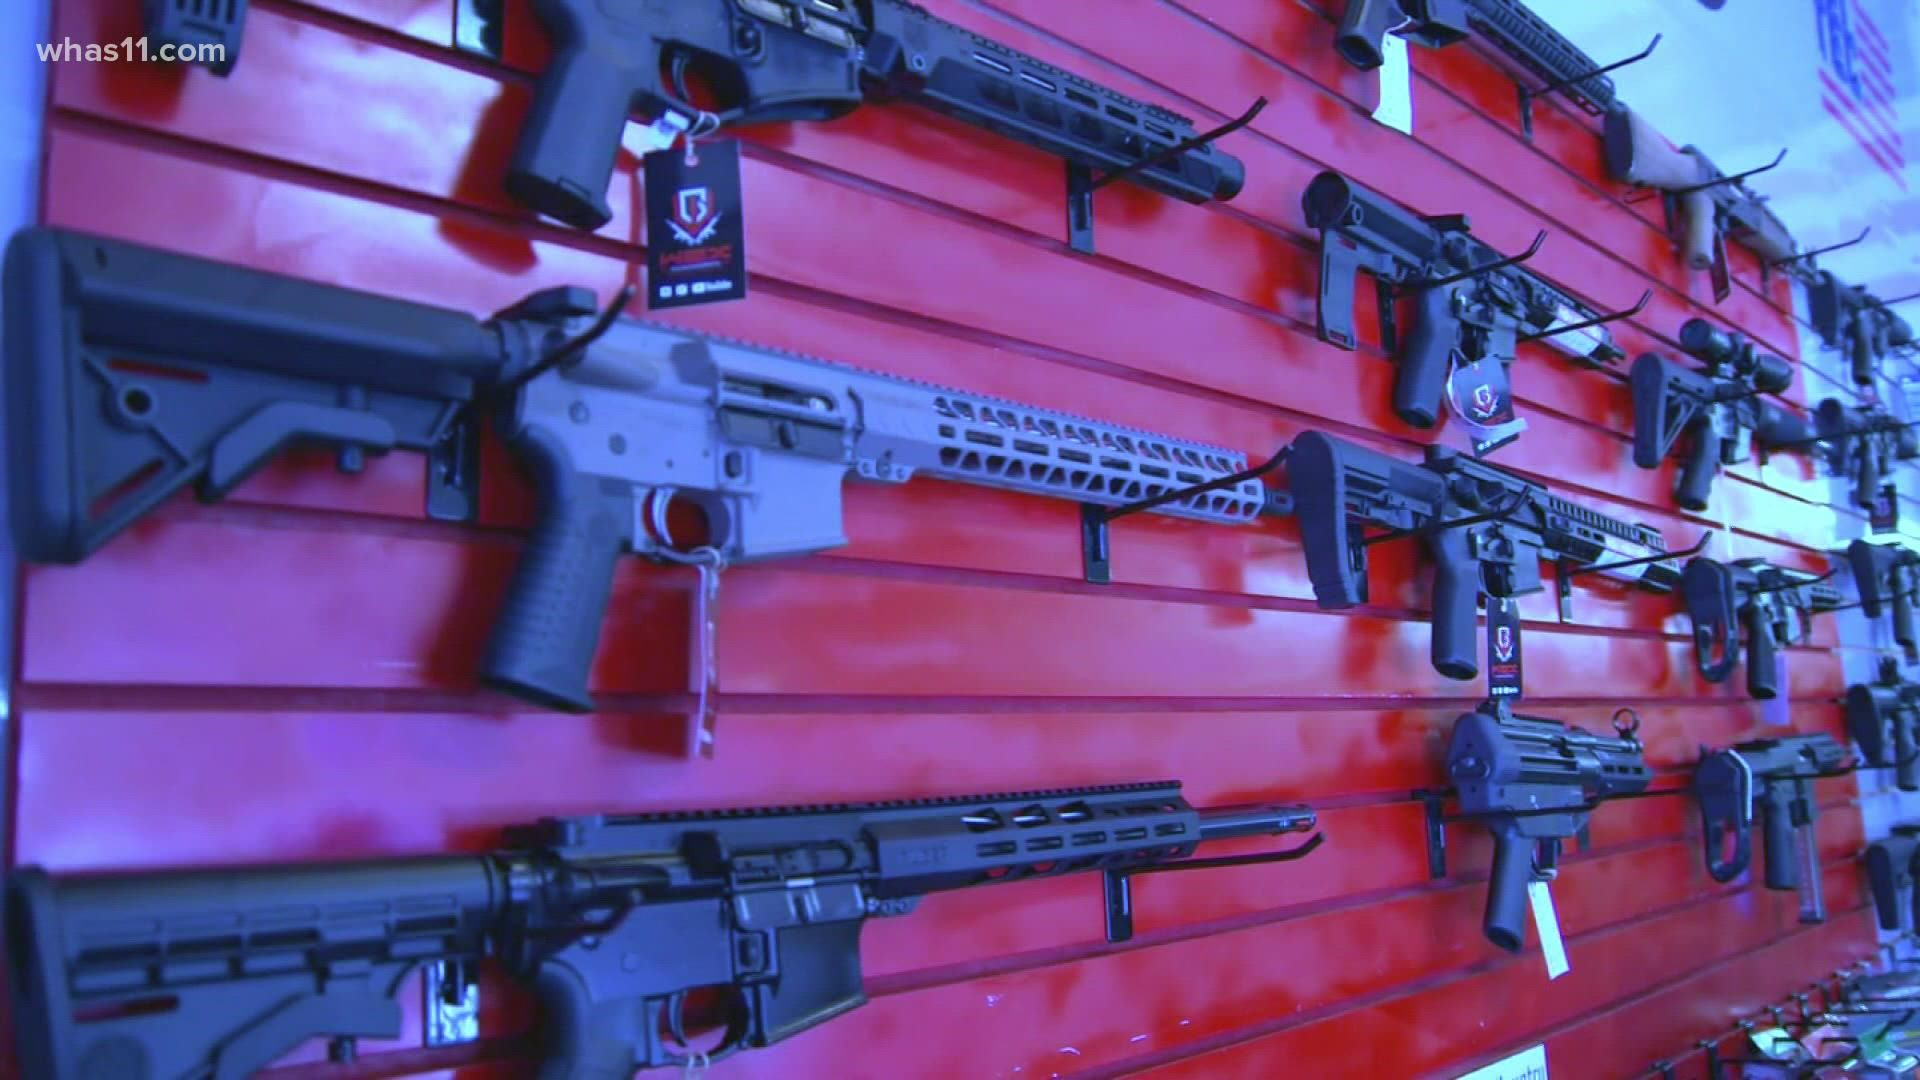 Kentuckians are urging the state's congressional delegation to take action on gun control after the horrific school shooting in Uvalde, Texas.